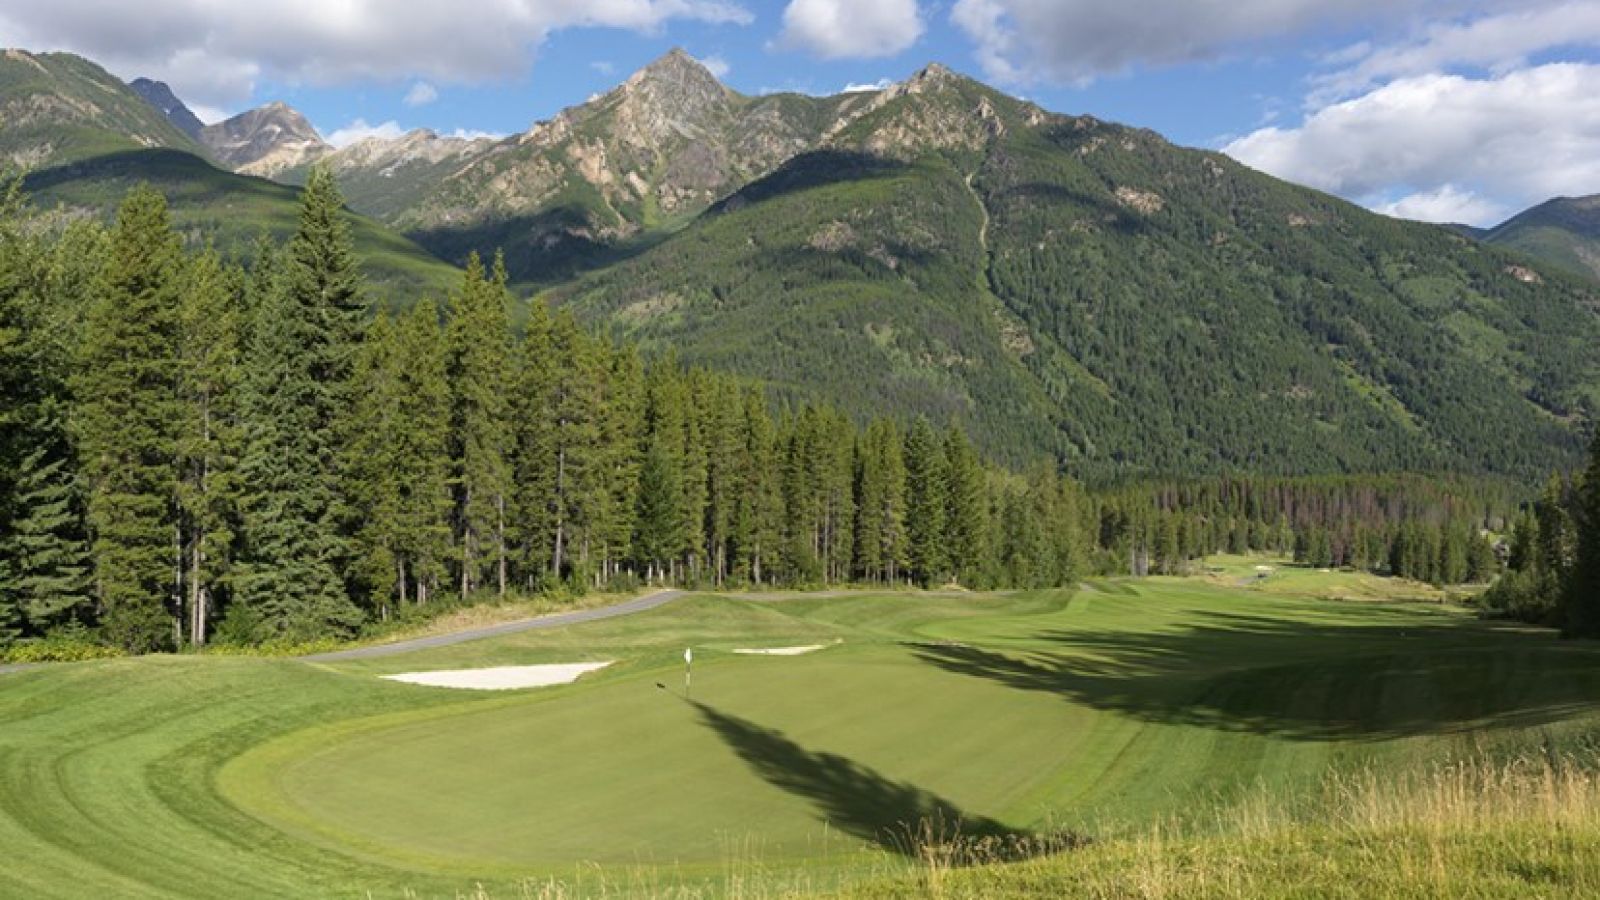 Pine Inn at Panorama Mountain Village - Columbia Valley golf packages